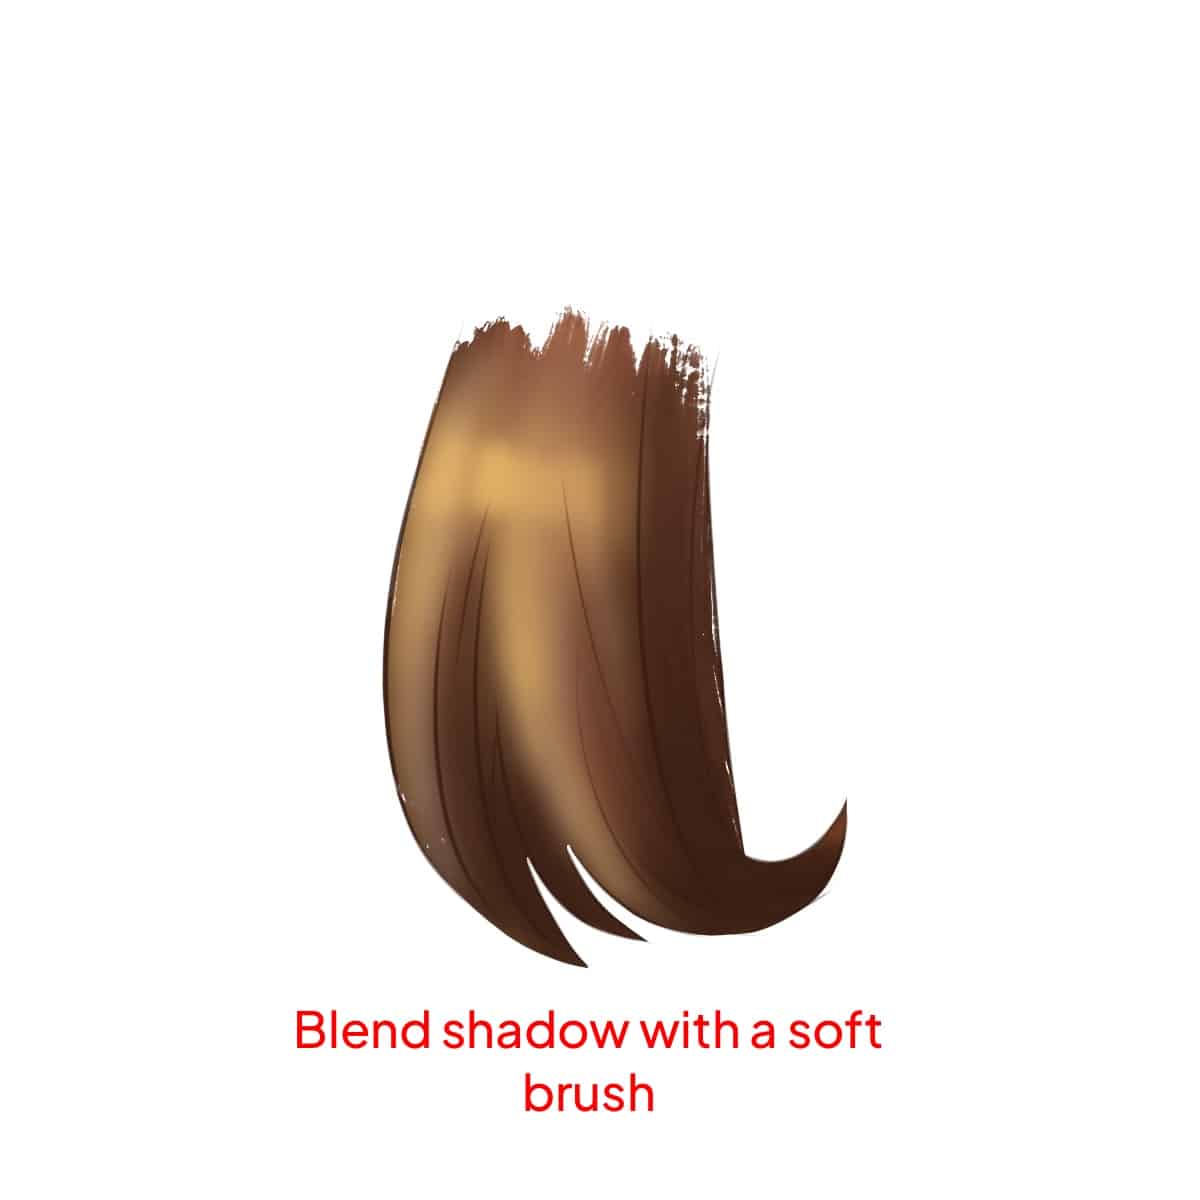 Blended shadow on hair sketch, drawn in Procreate application